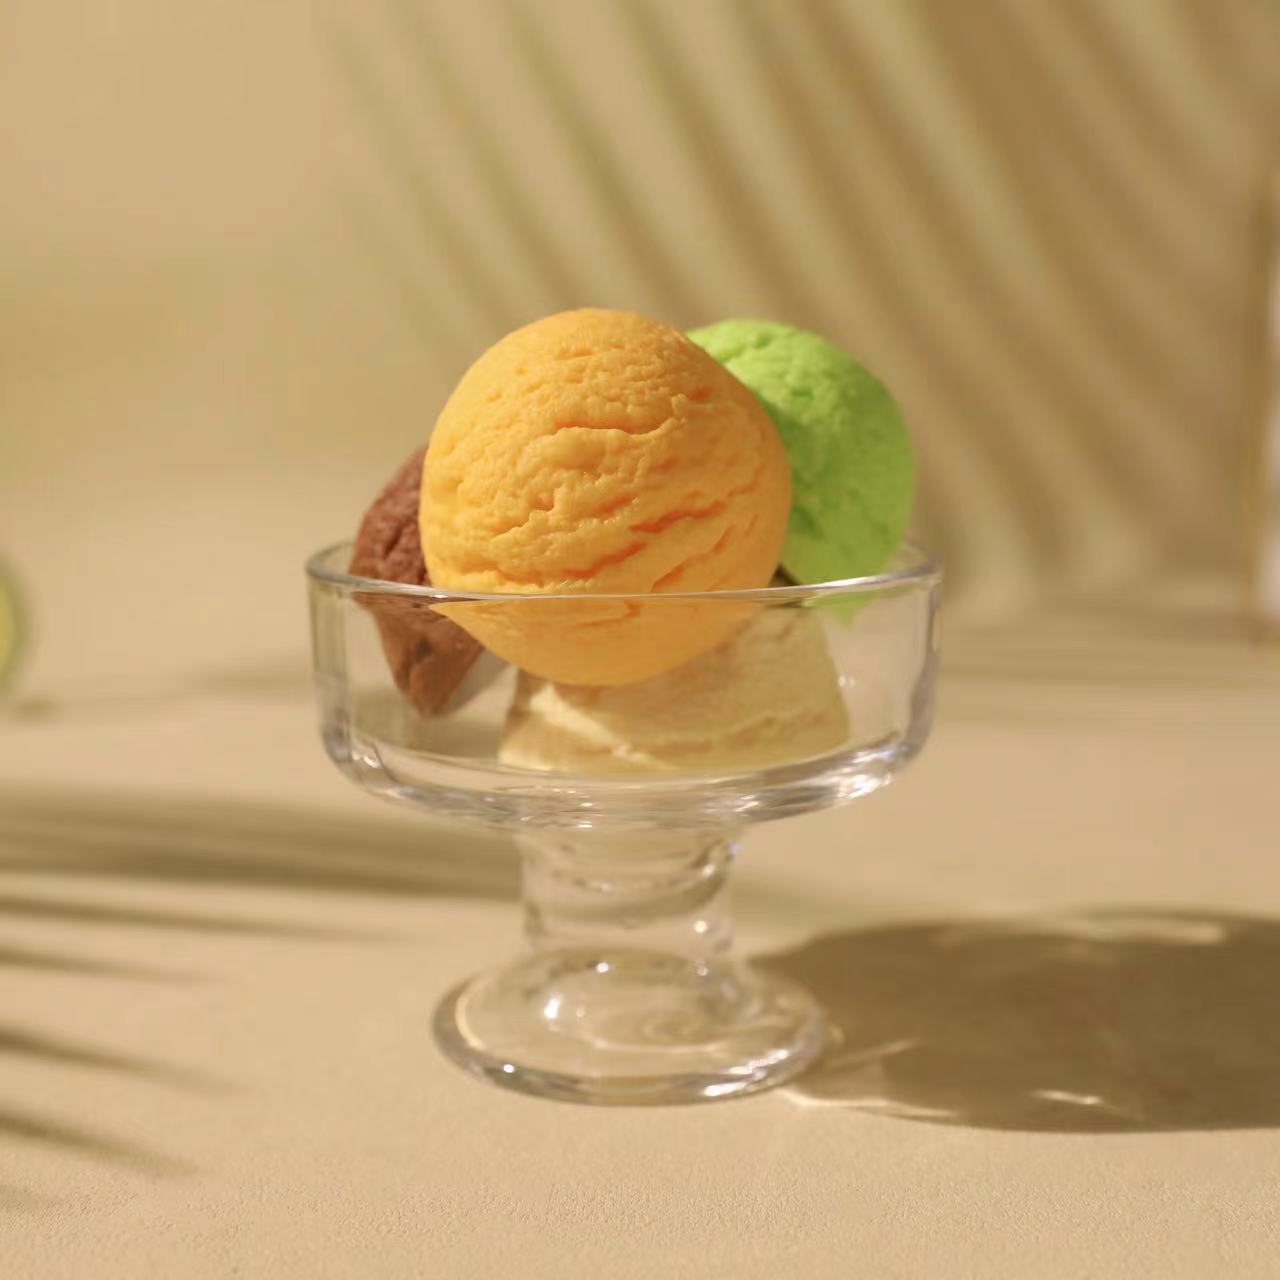 Why Choose Glass Material for Ice Cream Cups?